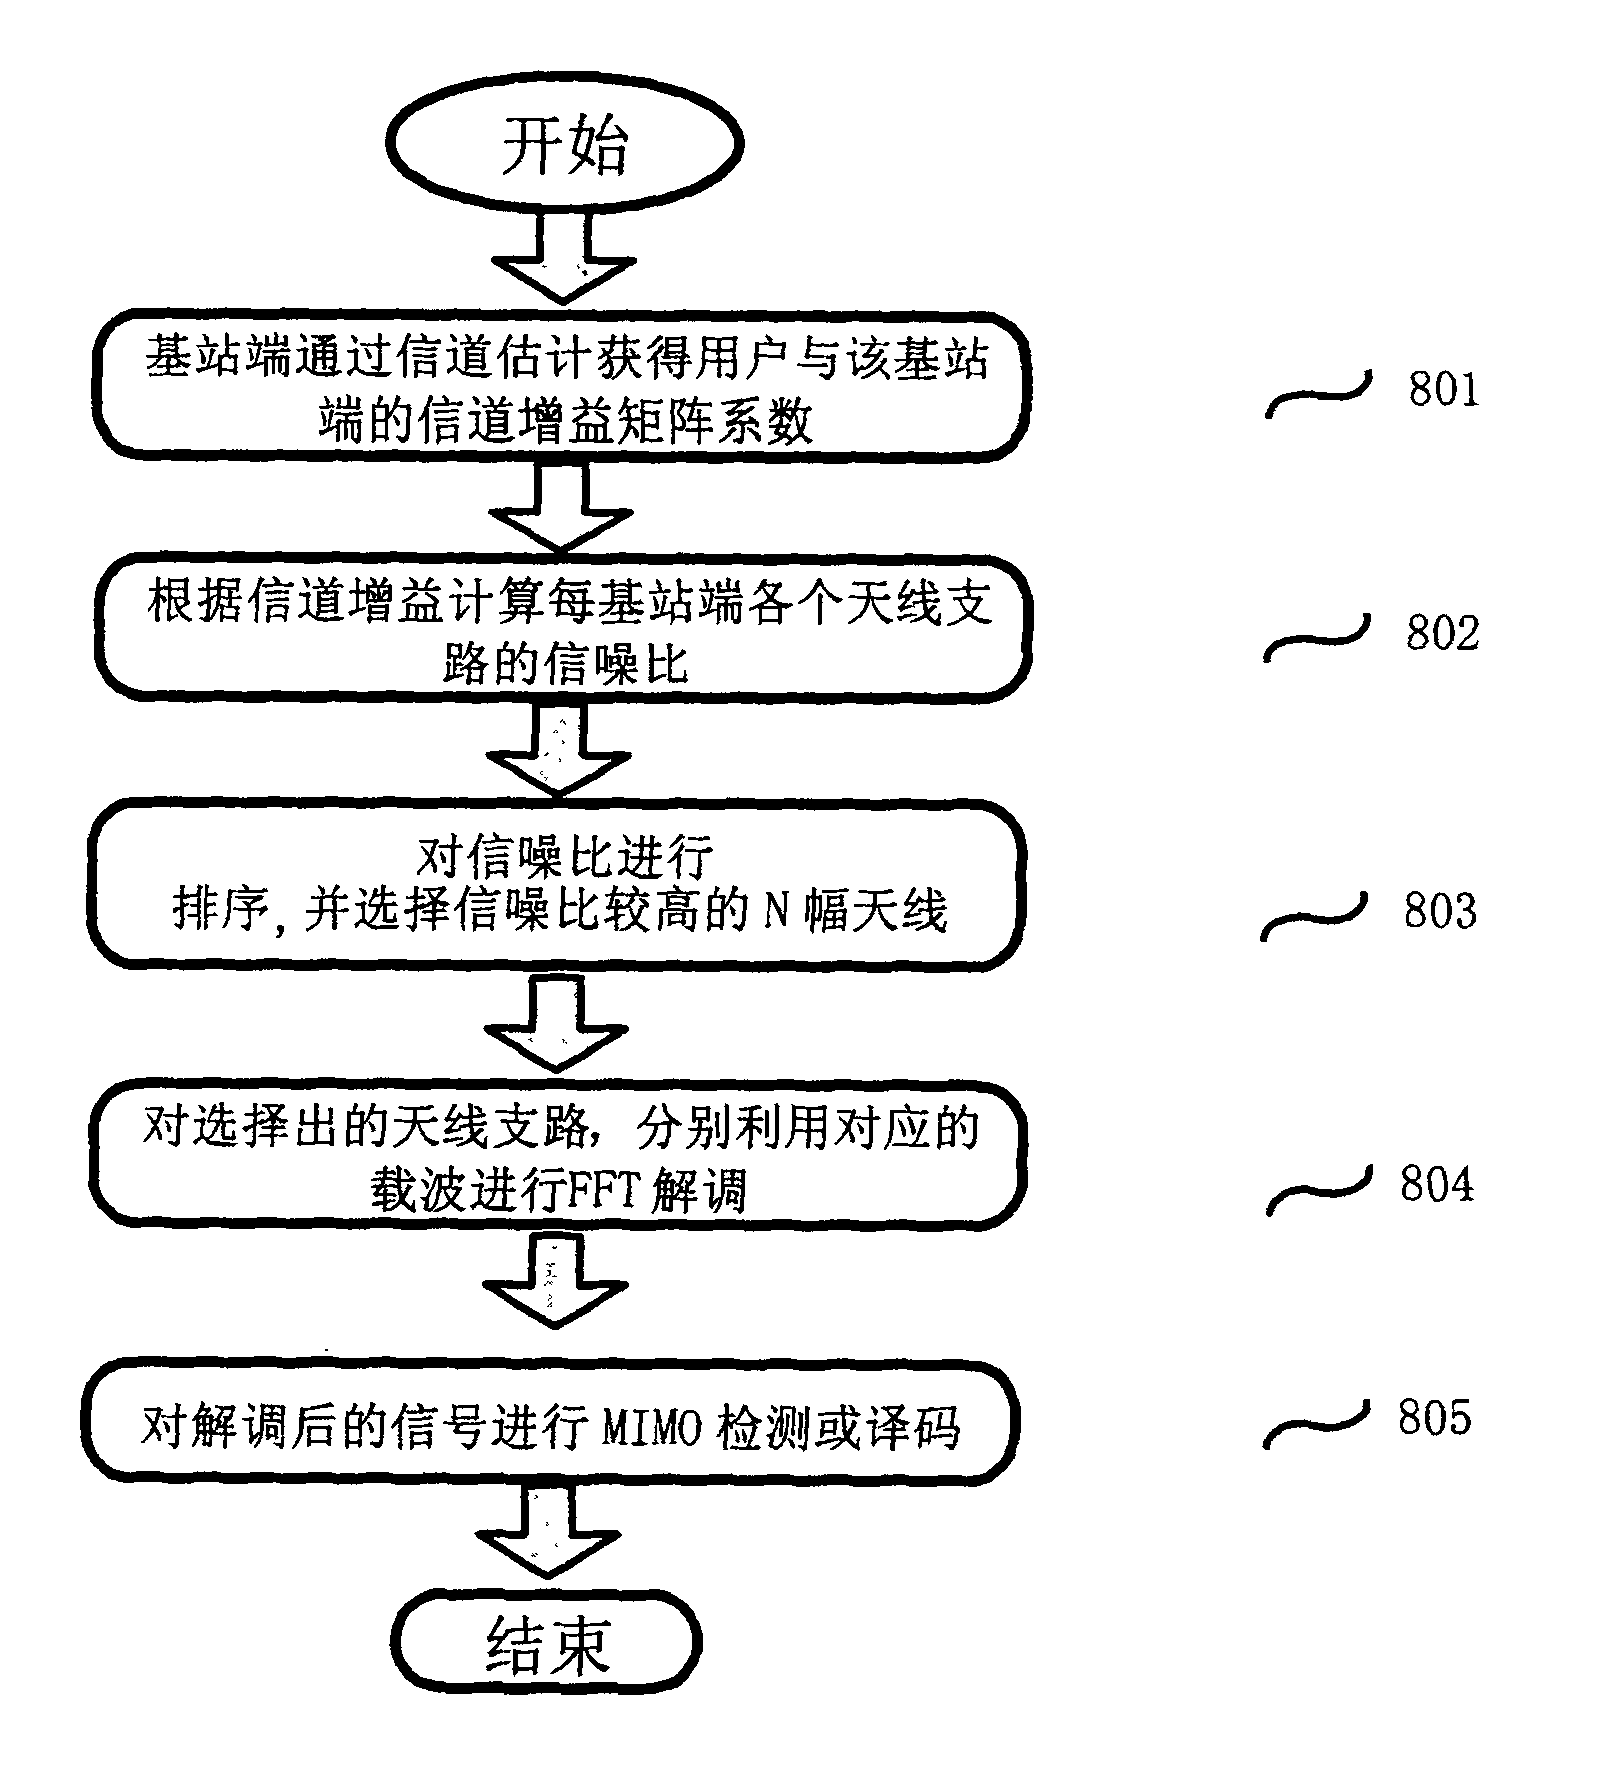 Uplink sub-macro method used for multiantenna, orthogonal frequency division multiple access cellular system